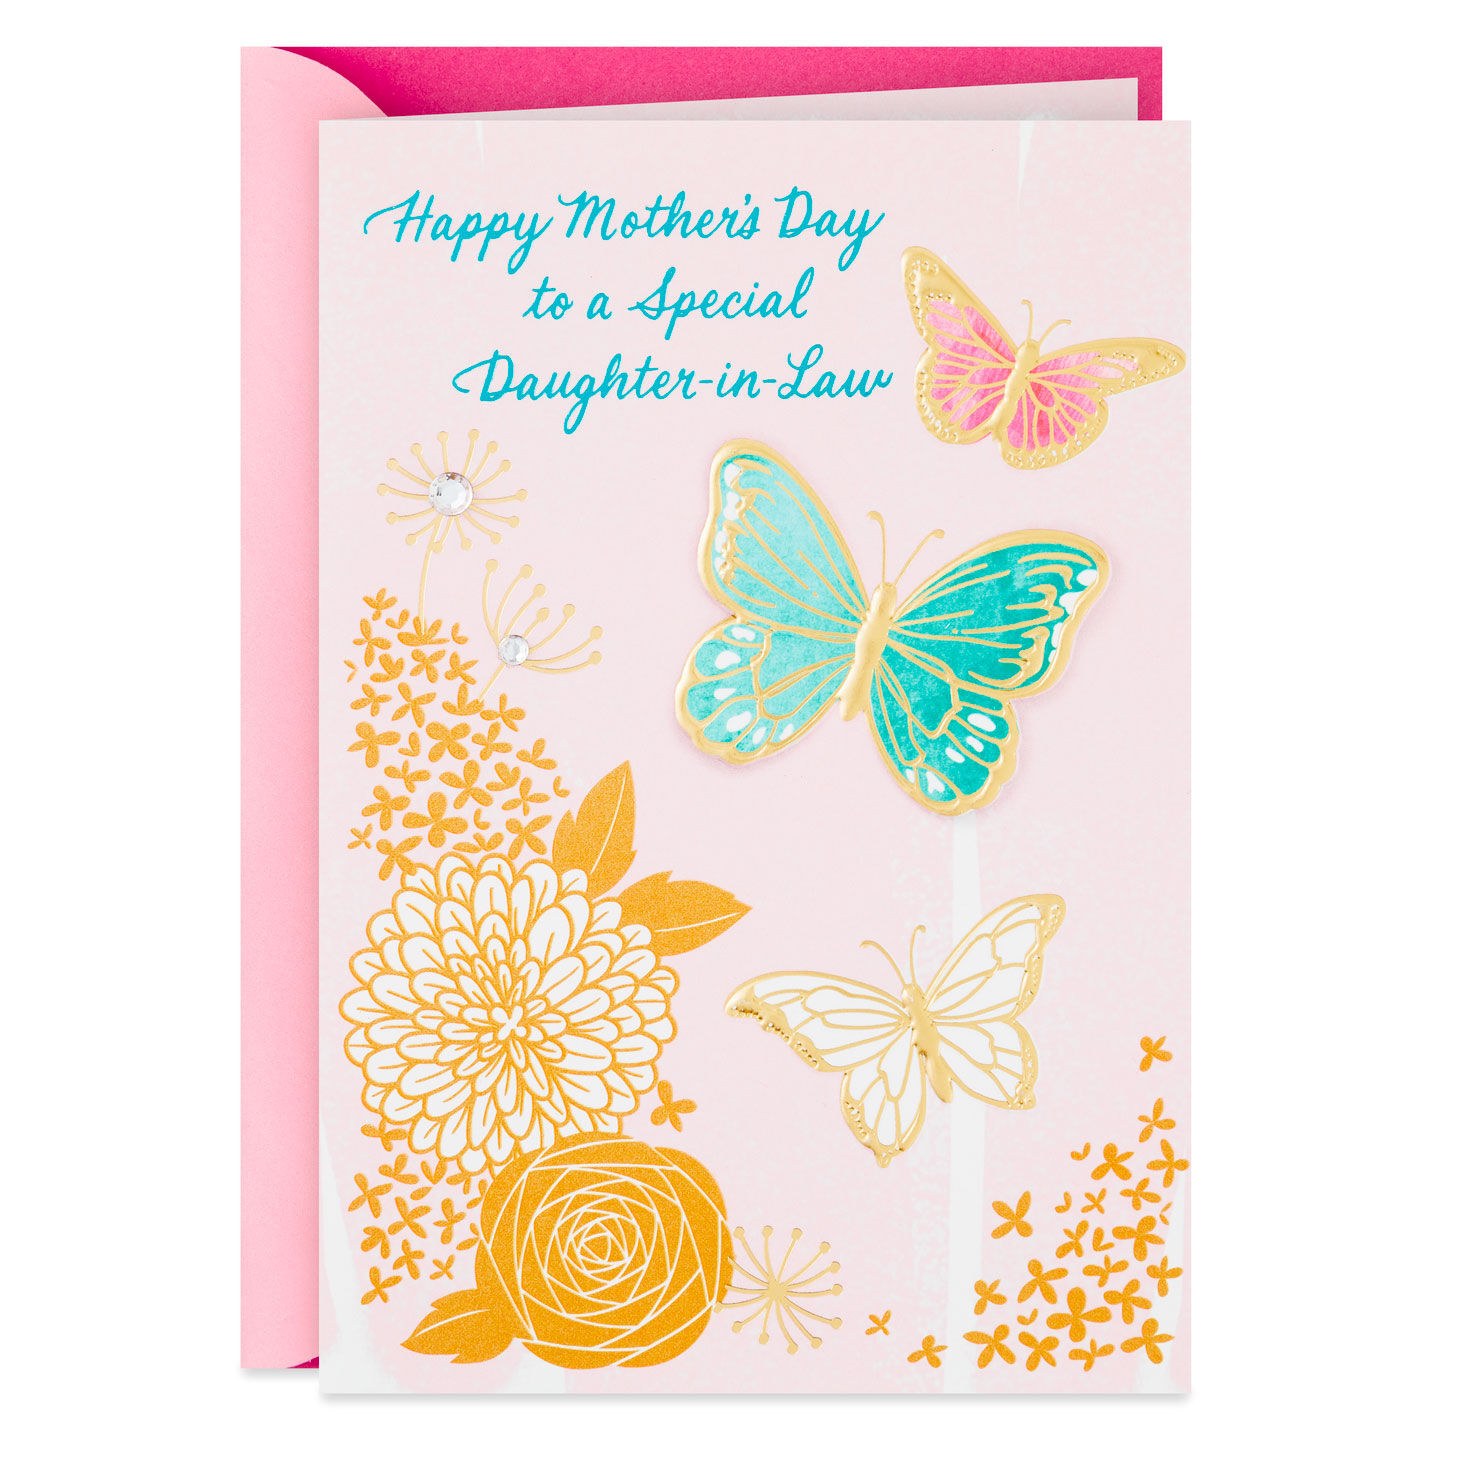 All the Little Joys and Love Mother's Day Card for Daughter-in-Law for only USD 4.99 | Hallmark